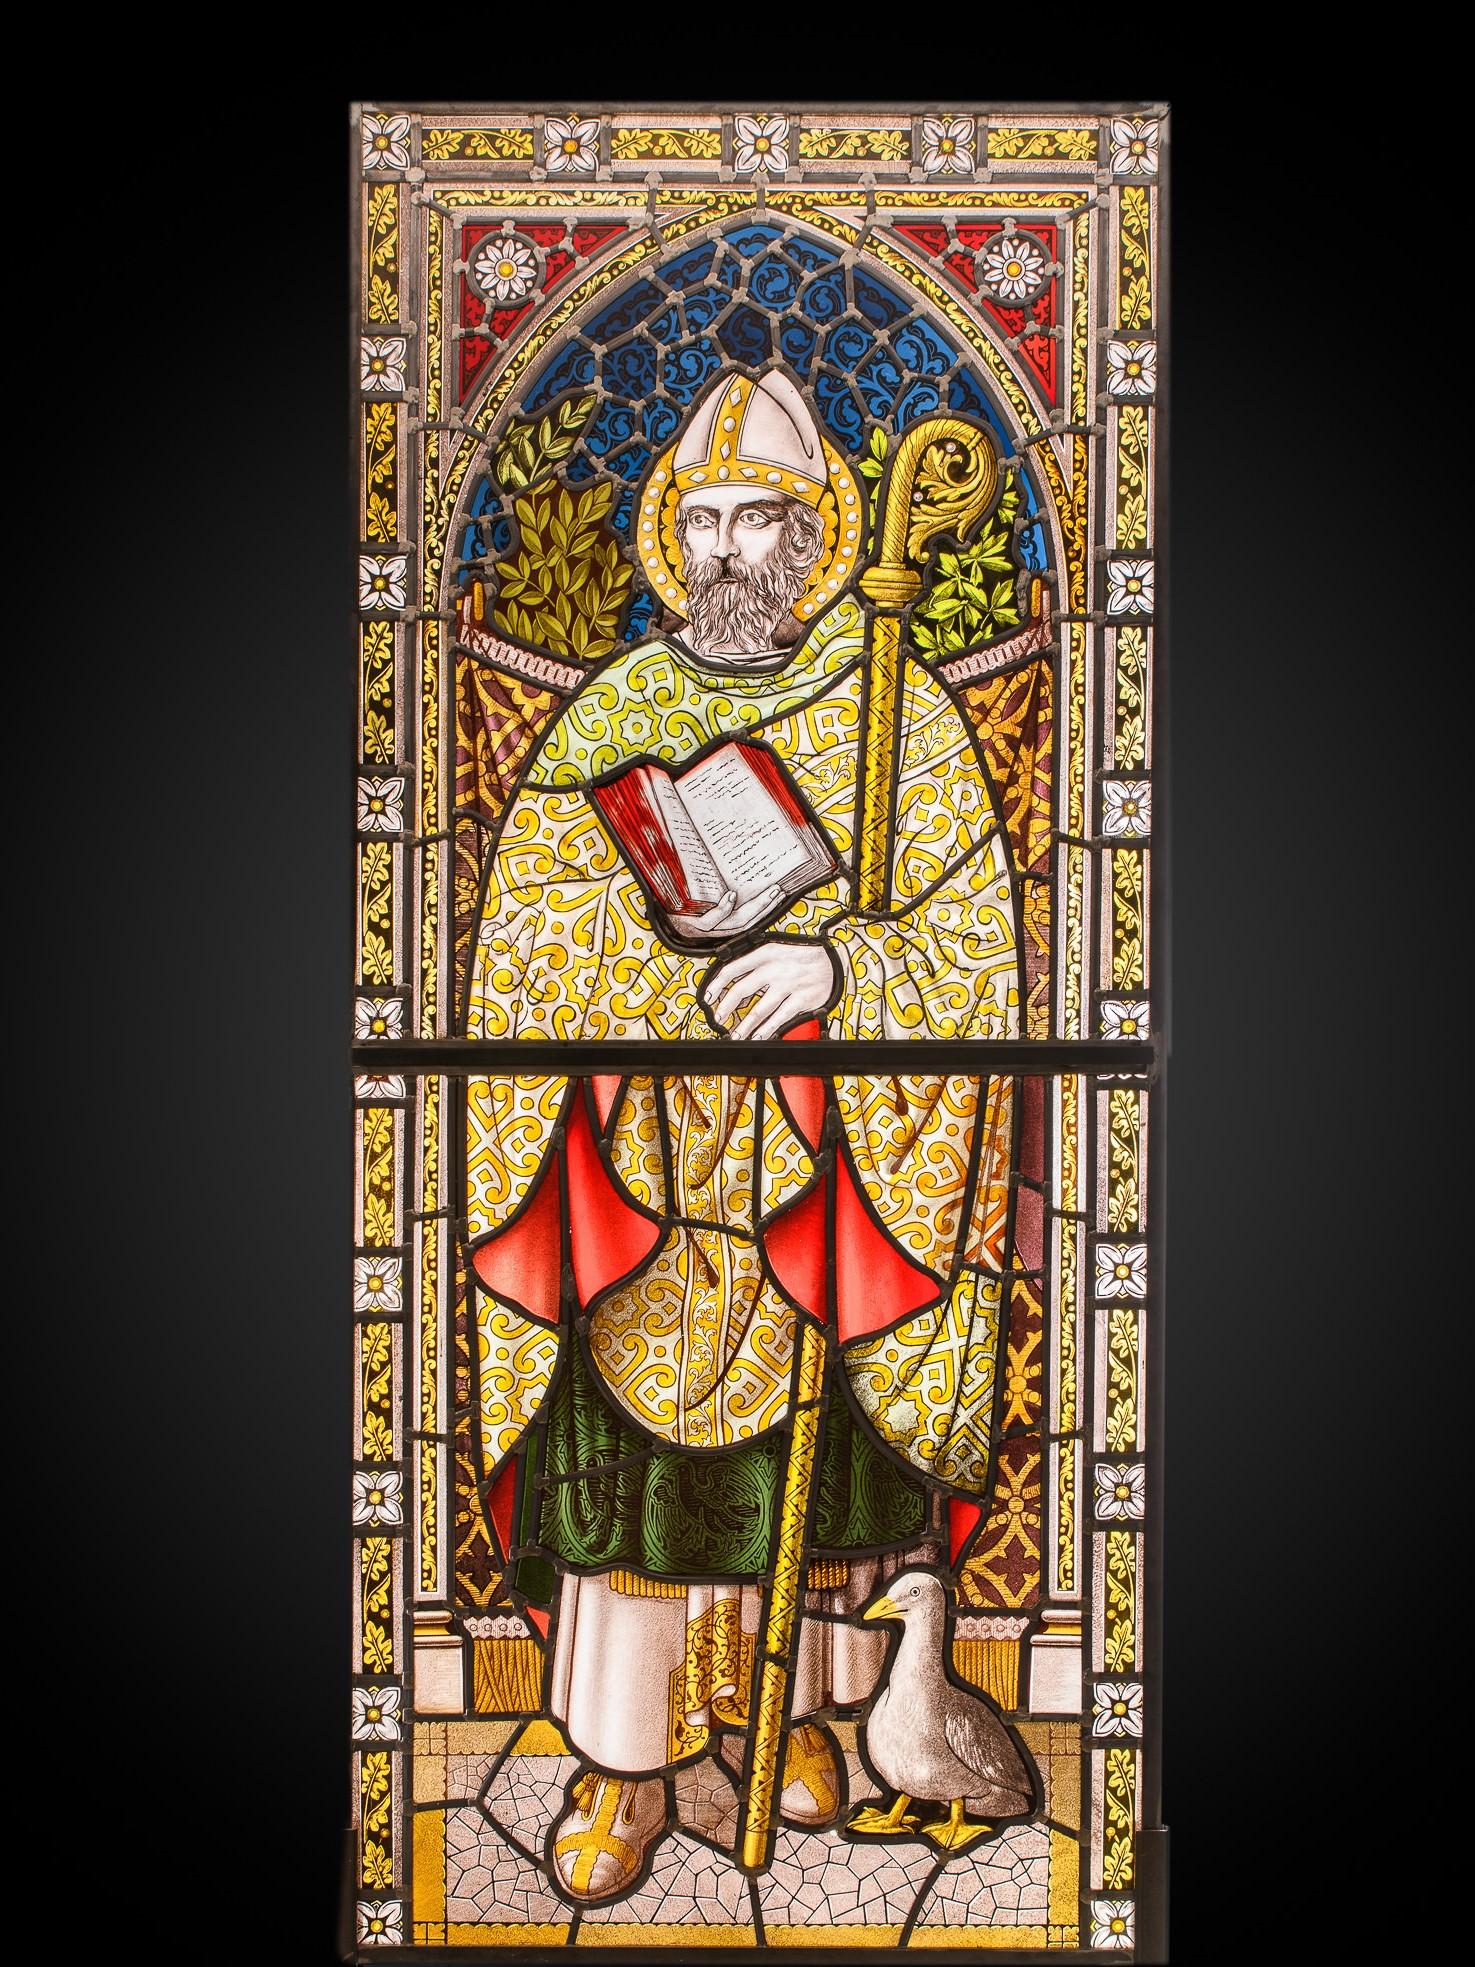 Neo-Gothic Stained Glass Window with St. Bernard of Clairvaux - Art by Unknown